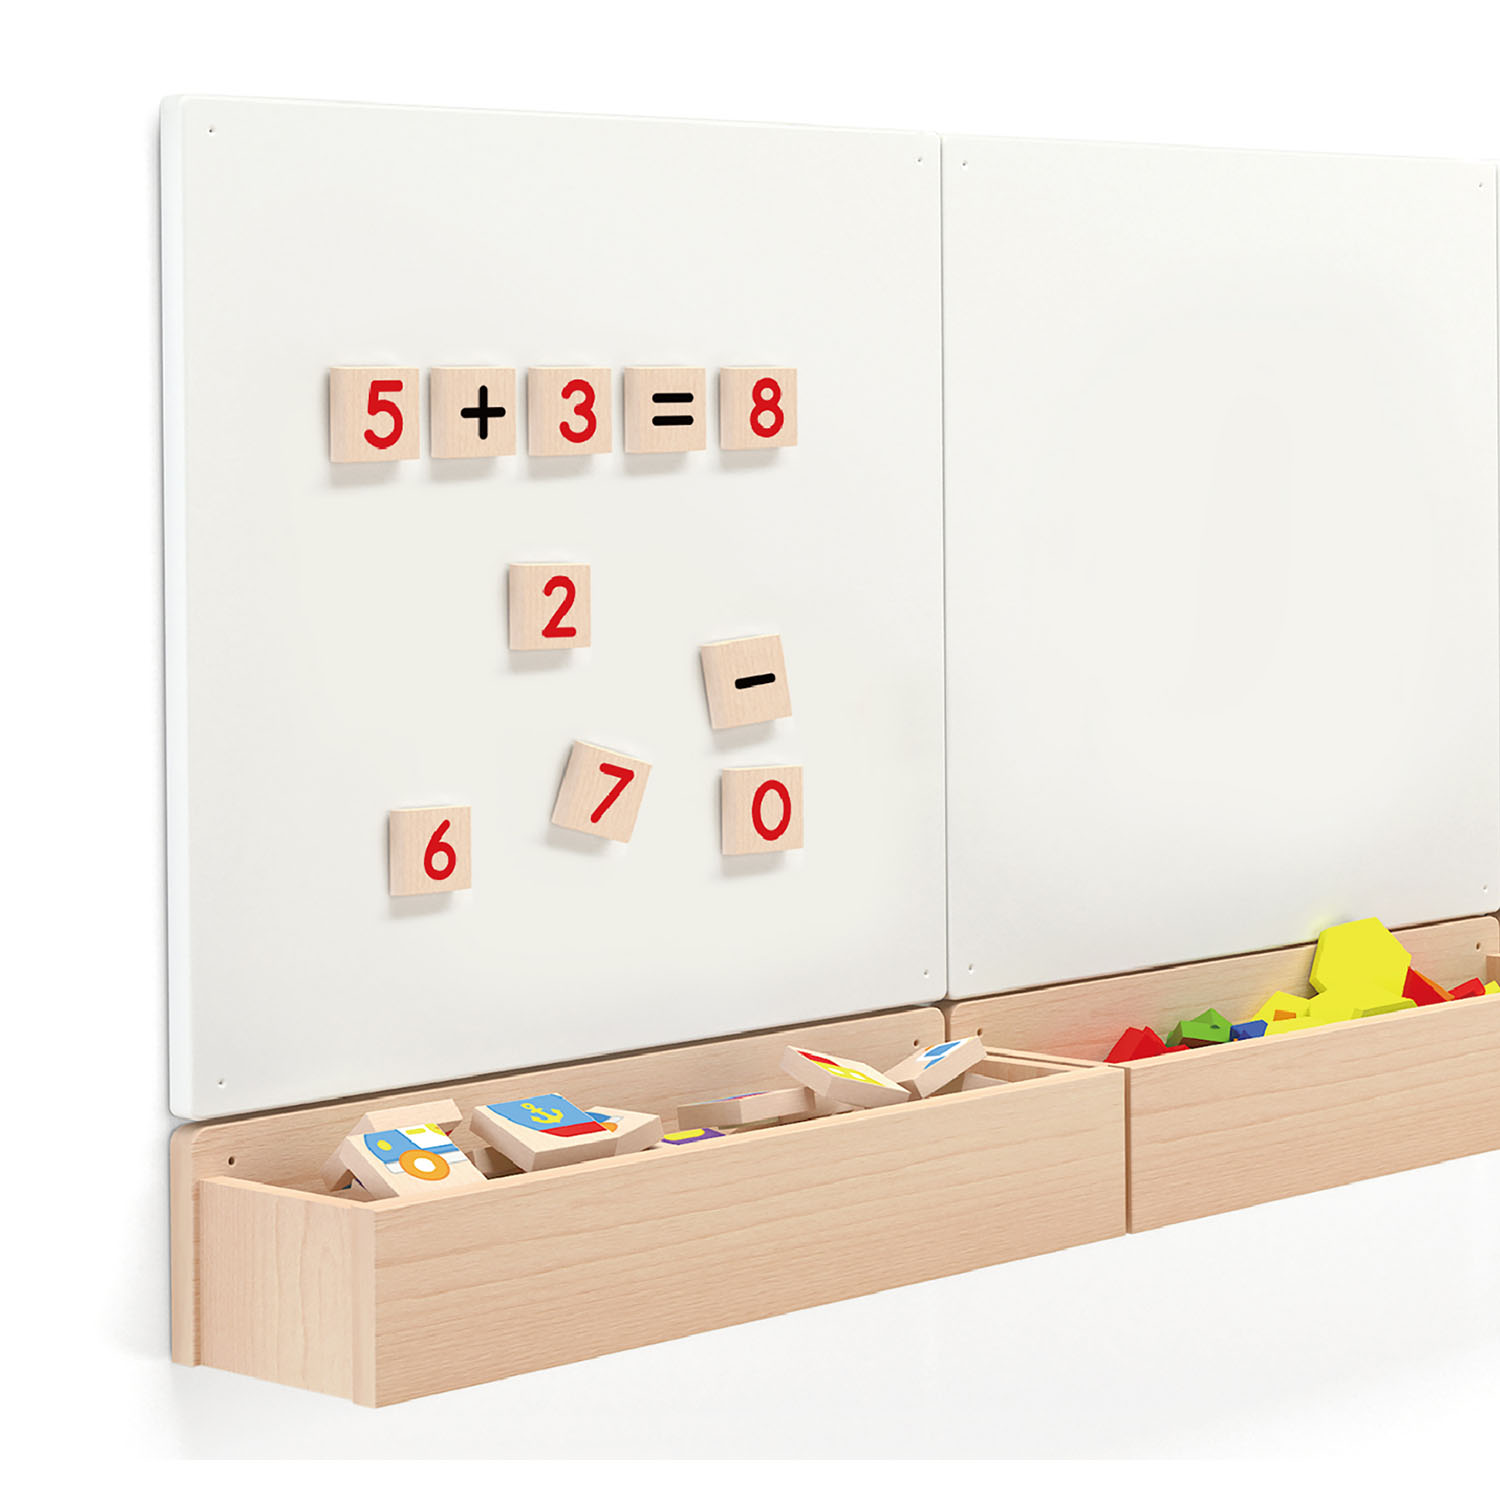 wooden magnetic wooden number tiles and operations signs